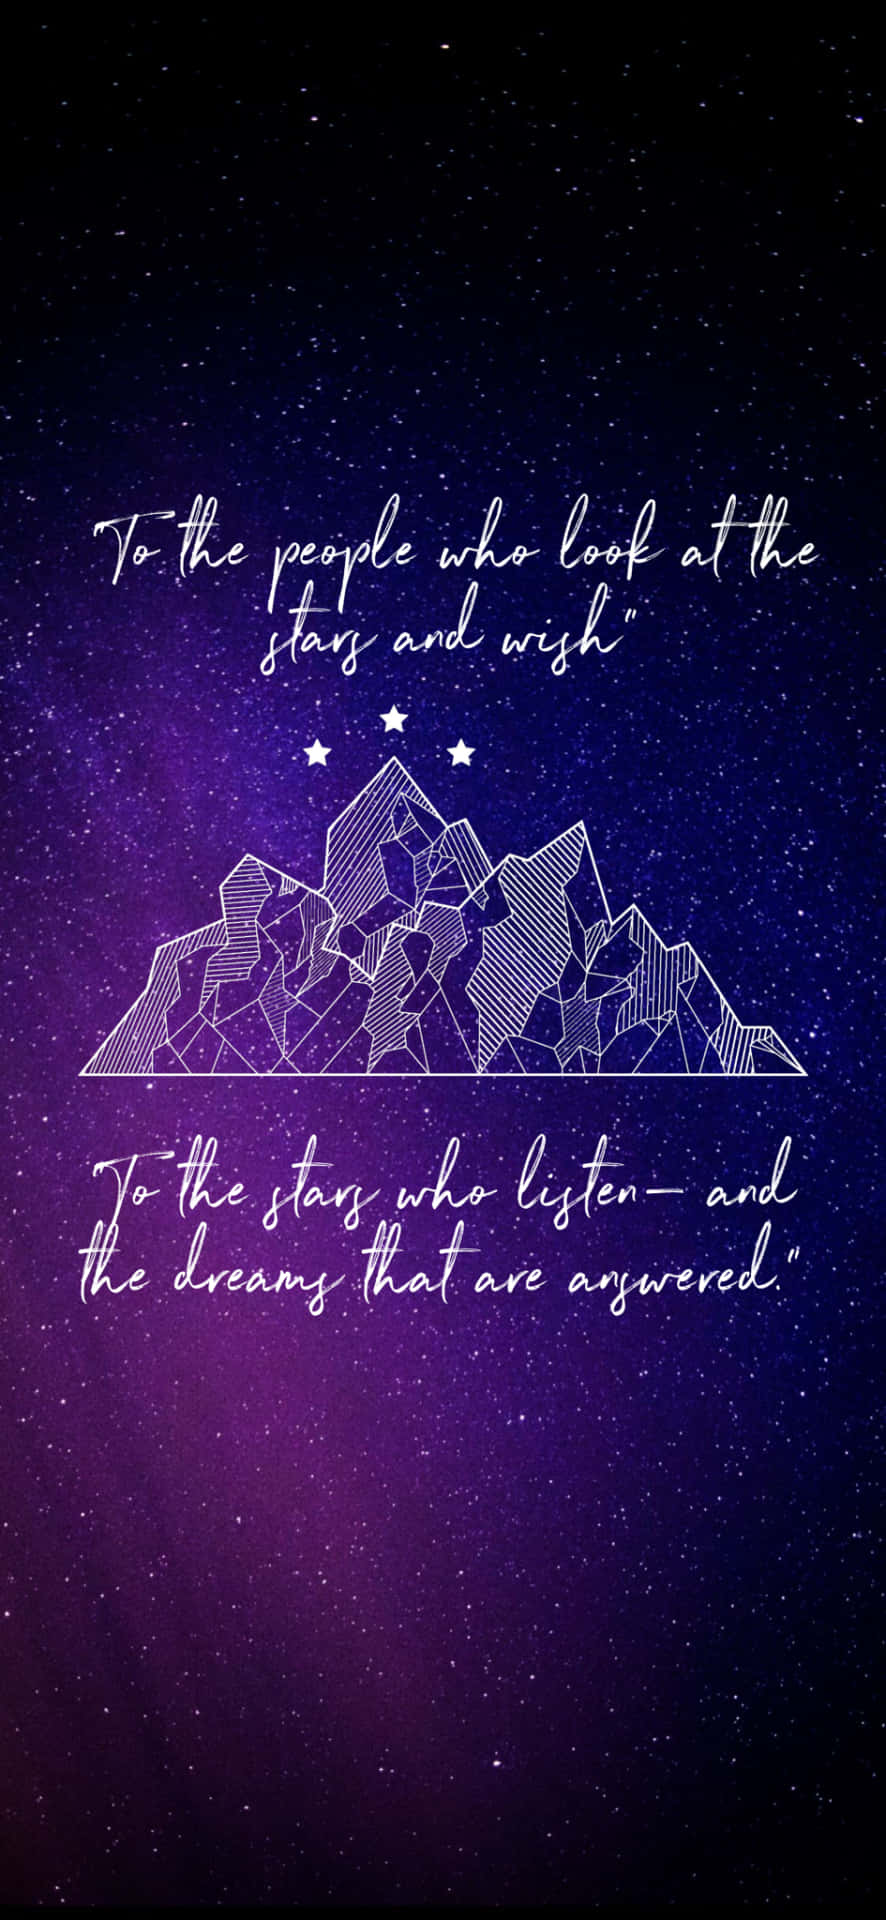 Ladda ner Önskapå Stjärnor Acotar Citat Lila - This Could Be A Possible  Translation Of wish On Stars Acotar Quote Purple In The Context Of A  Computer Or Mobile Wallpaper. Wallpaper